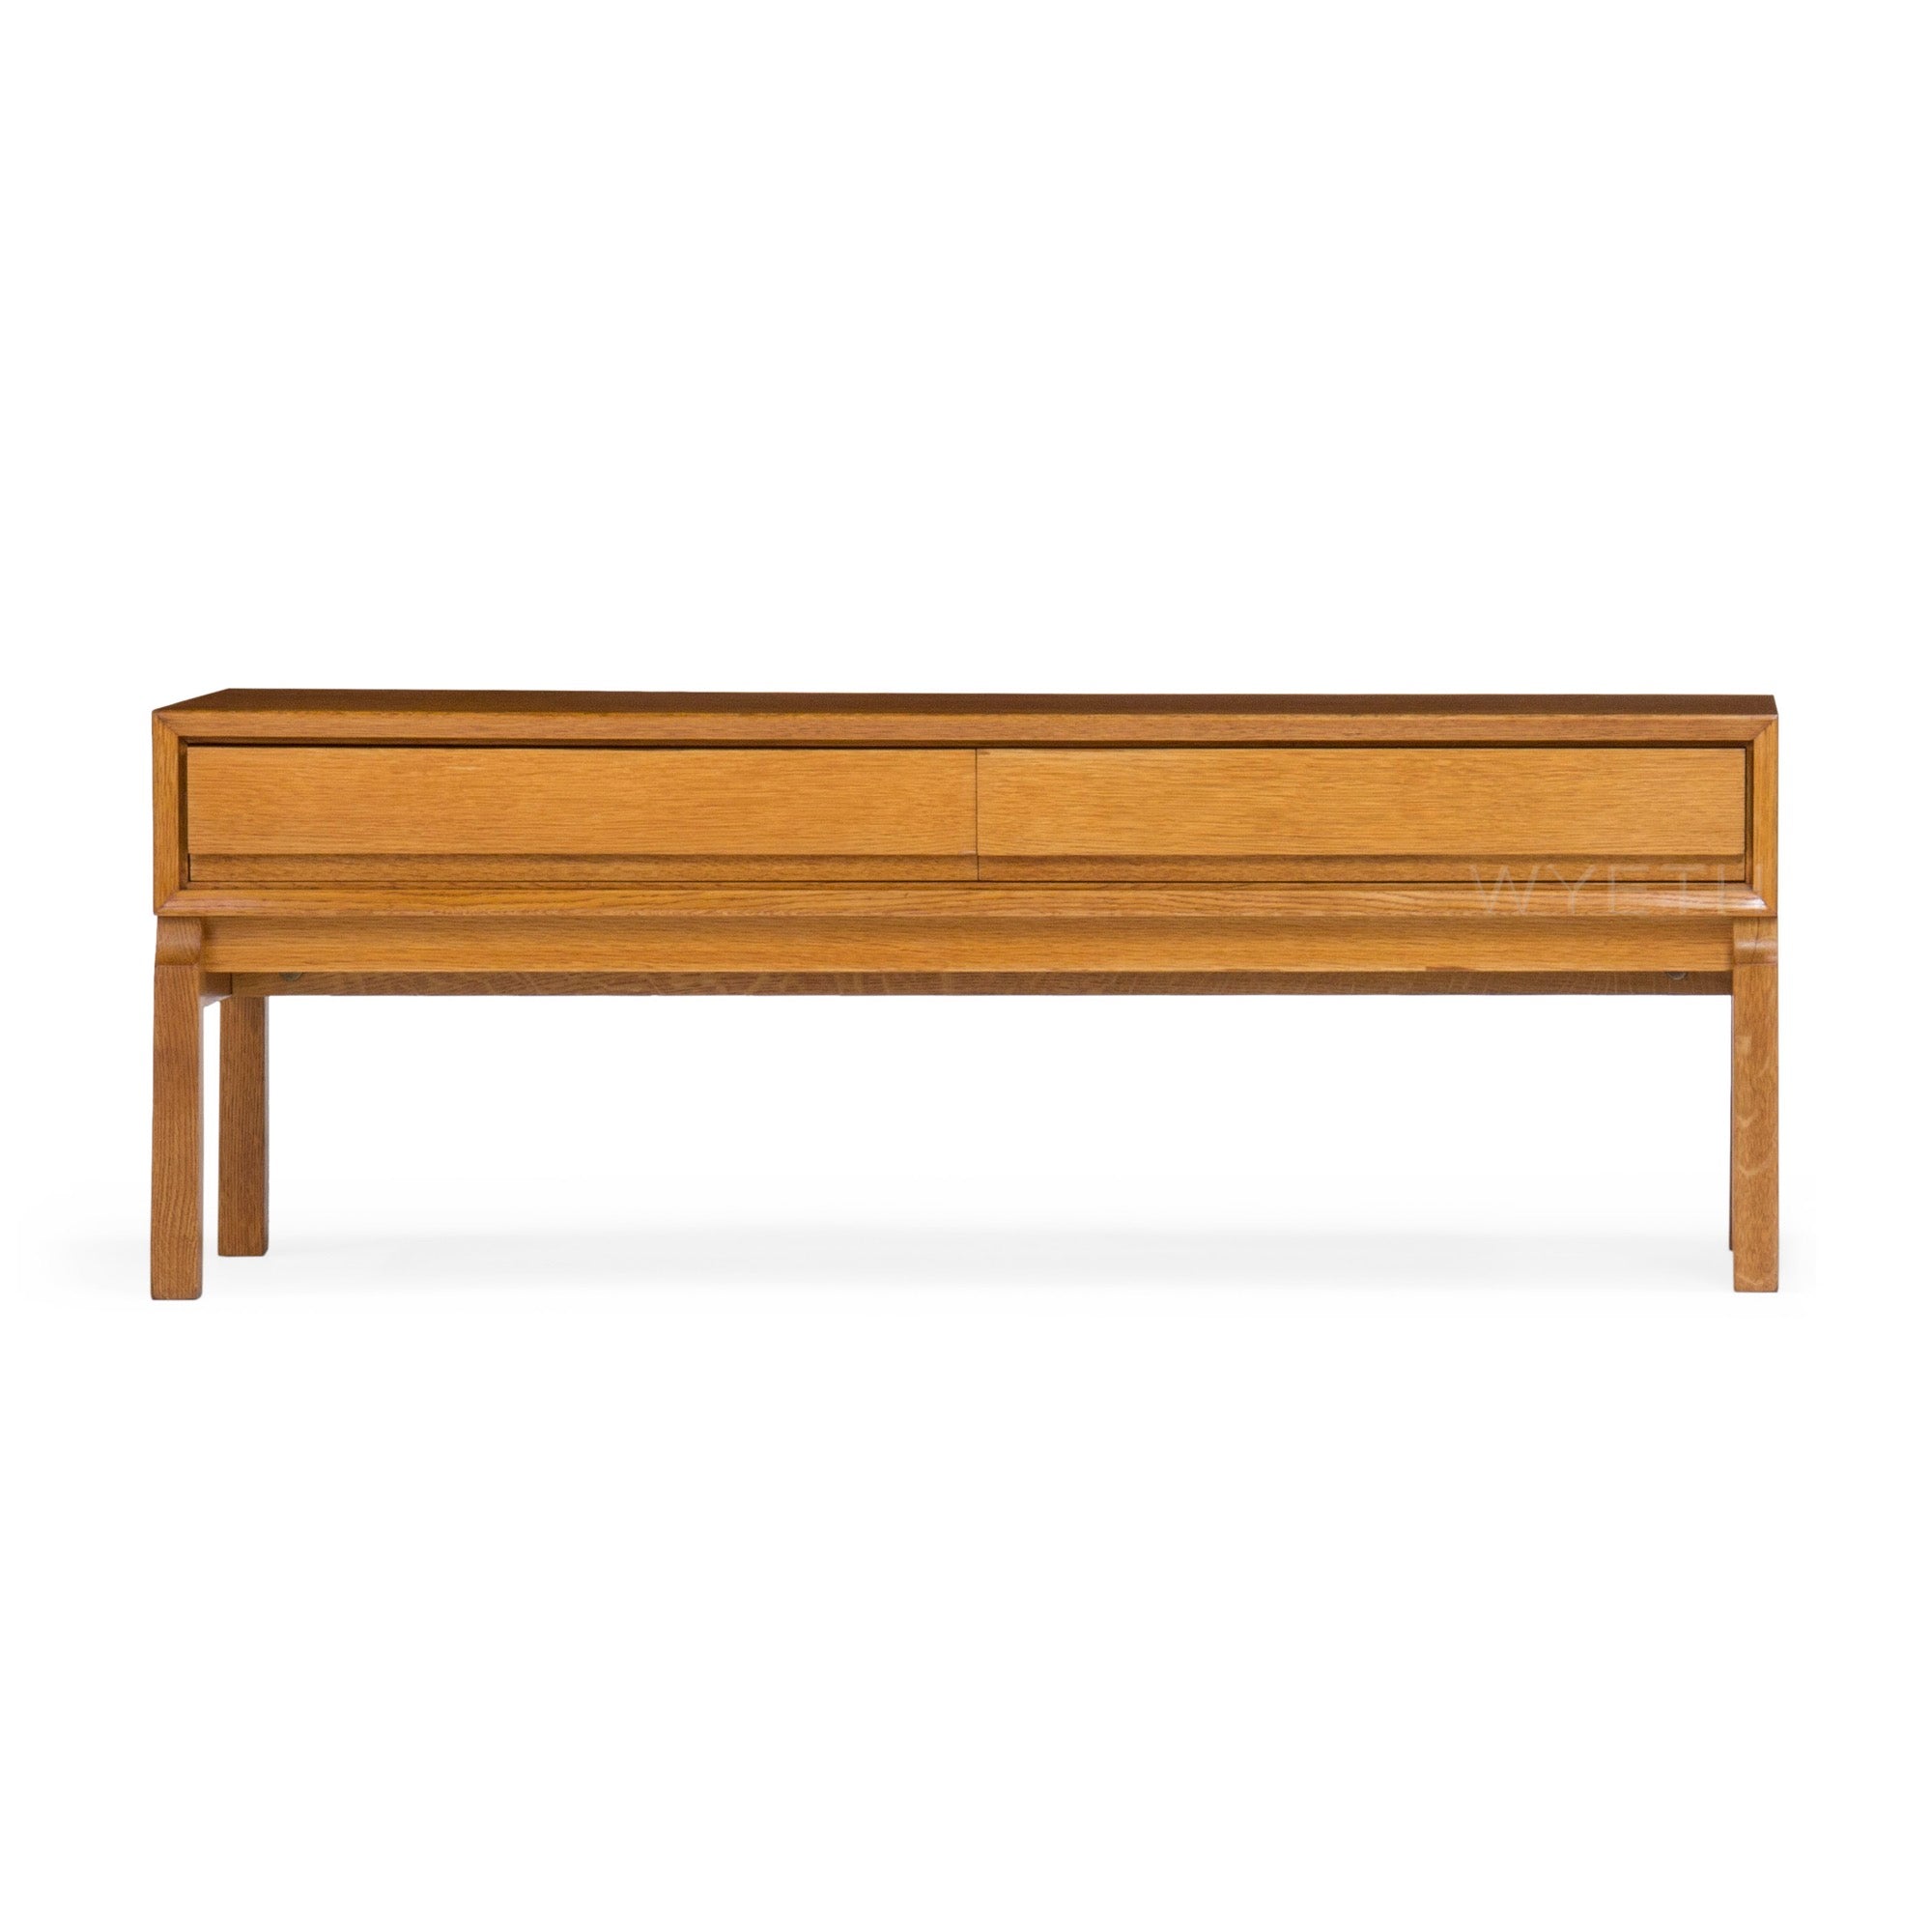 Low Cabinet or Bench In the Style of Edward Wormley